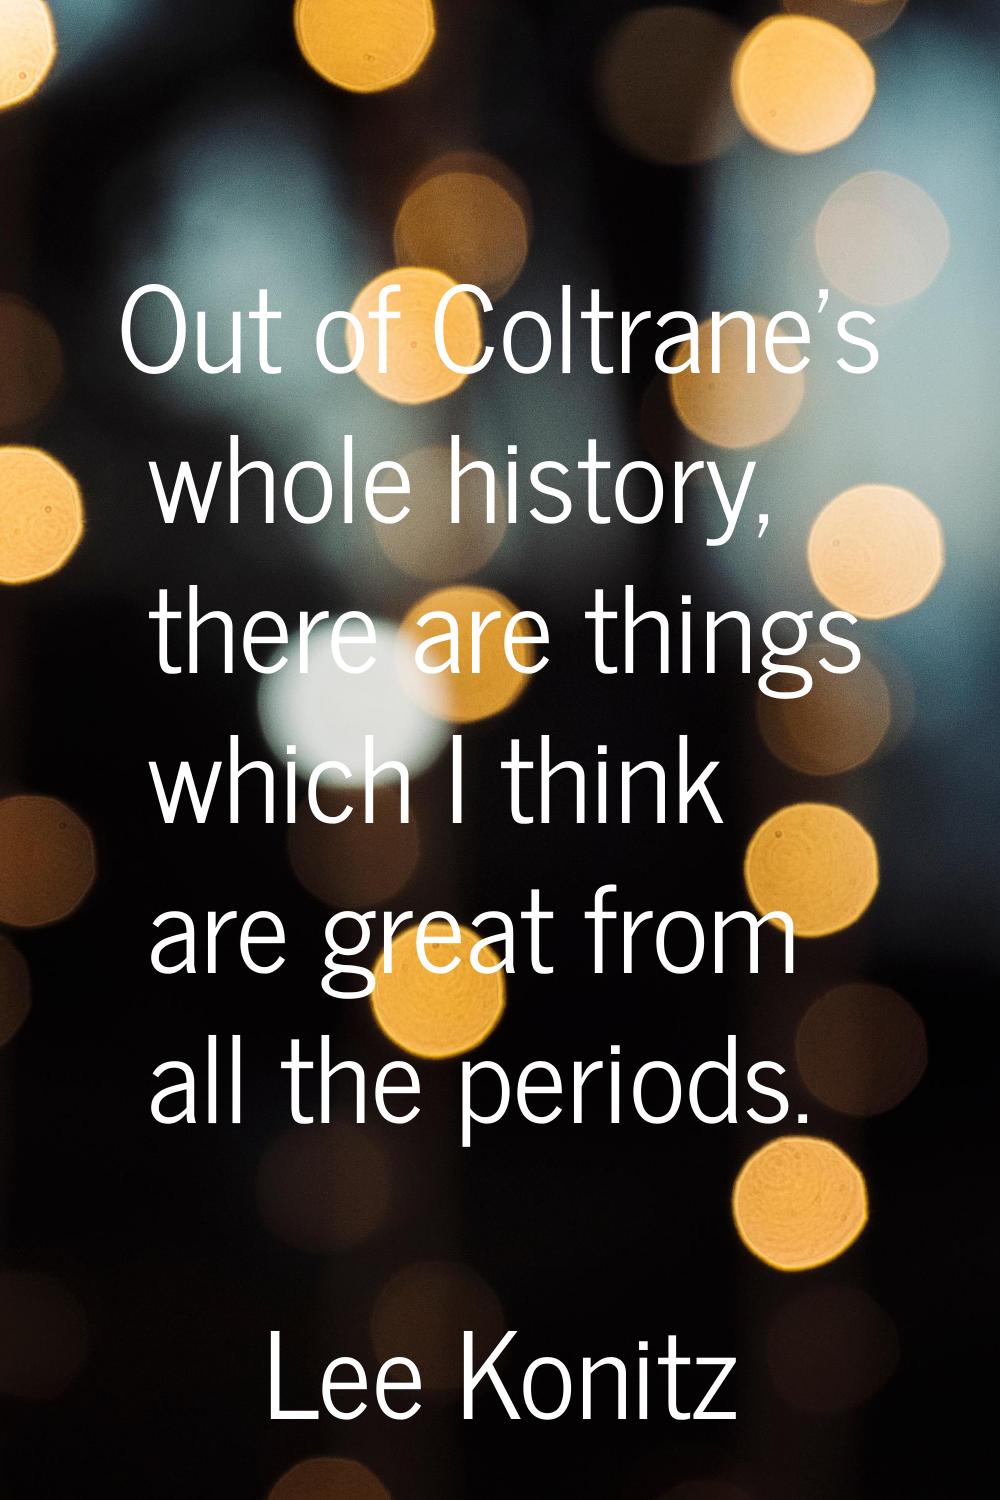 Out of Coltrane's whole history, there are things which I think are great from all the periods.